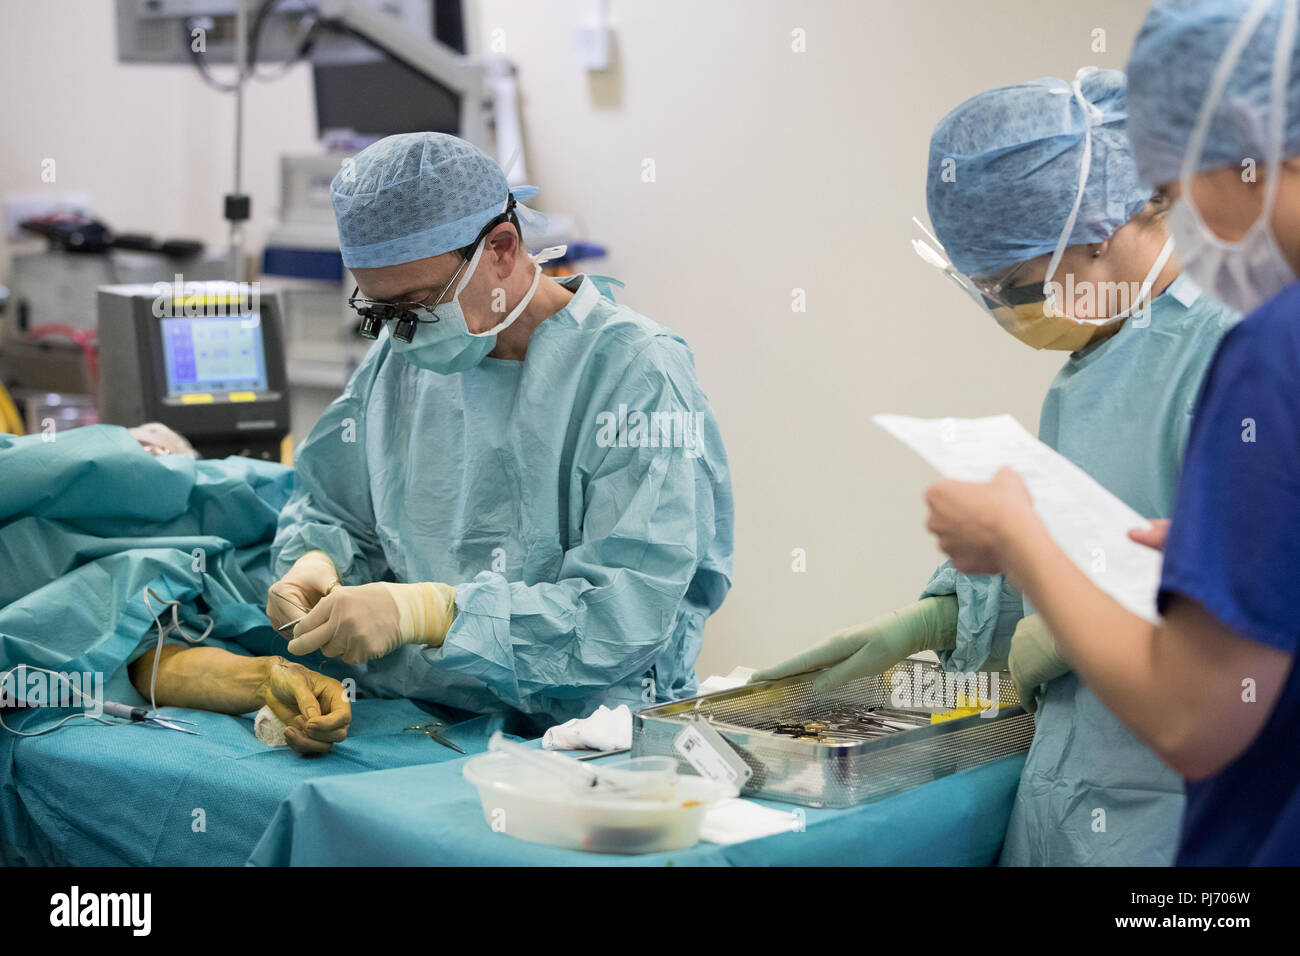 Carlos Heras-Palou, 53, performing hand surgery at Derby Nuffield Hospital. Mr Heras-Palou, an orthopaedic specialist surgeon, may have had his career saved by a new drug called 'Patisiran'. The rare disease, hereditary transthyretin-mediated amyloidosis (hATTR amyloidosis), progressed and destroyed the nerves in his hands, rendering them useless. However after an 18 month course of Patisiran the condition has halted and reversed. Stock Photo